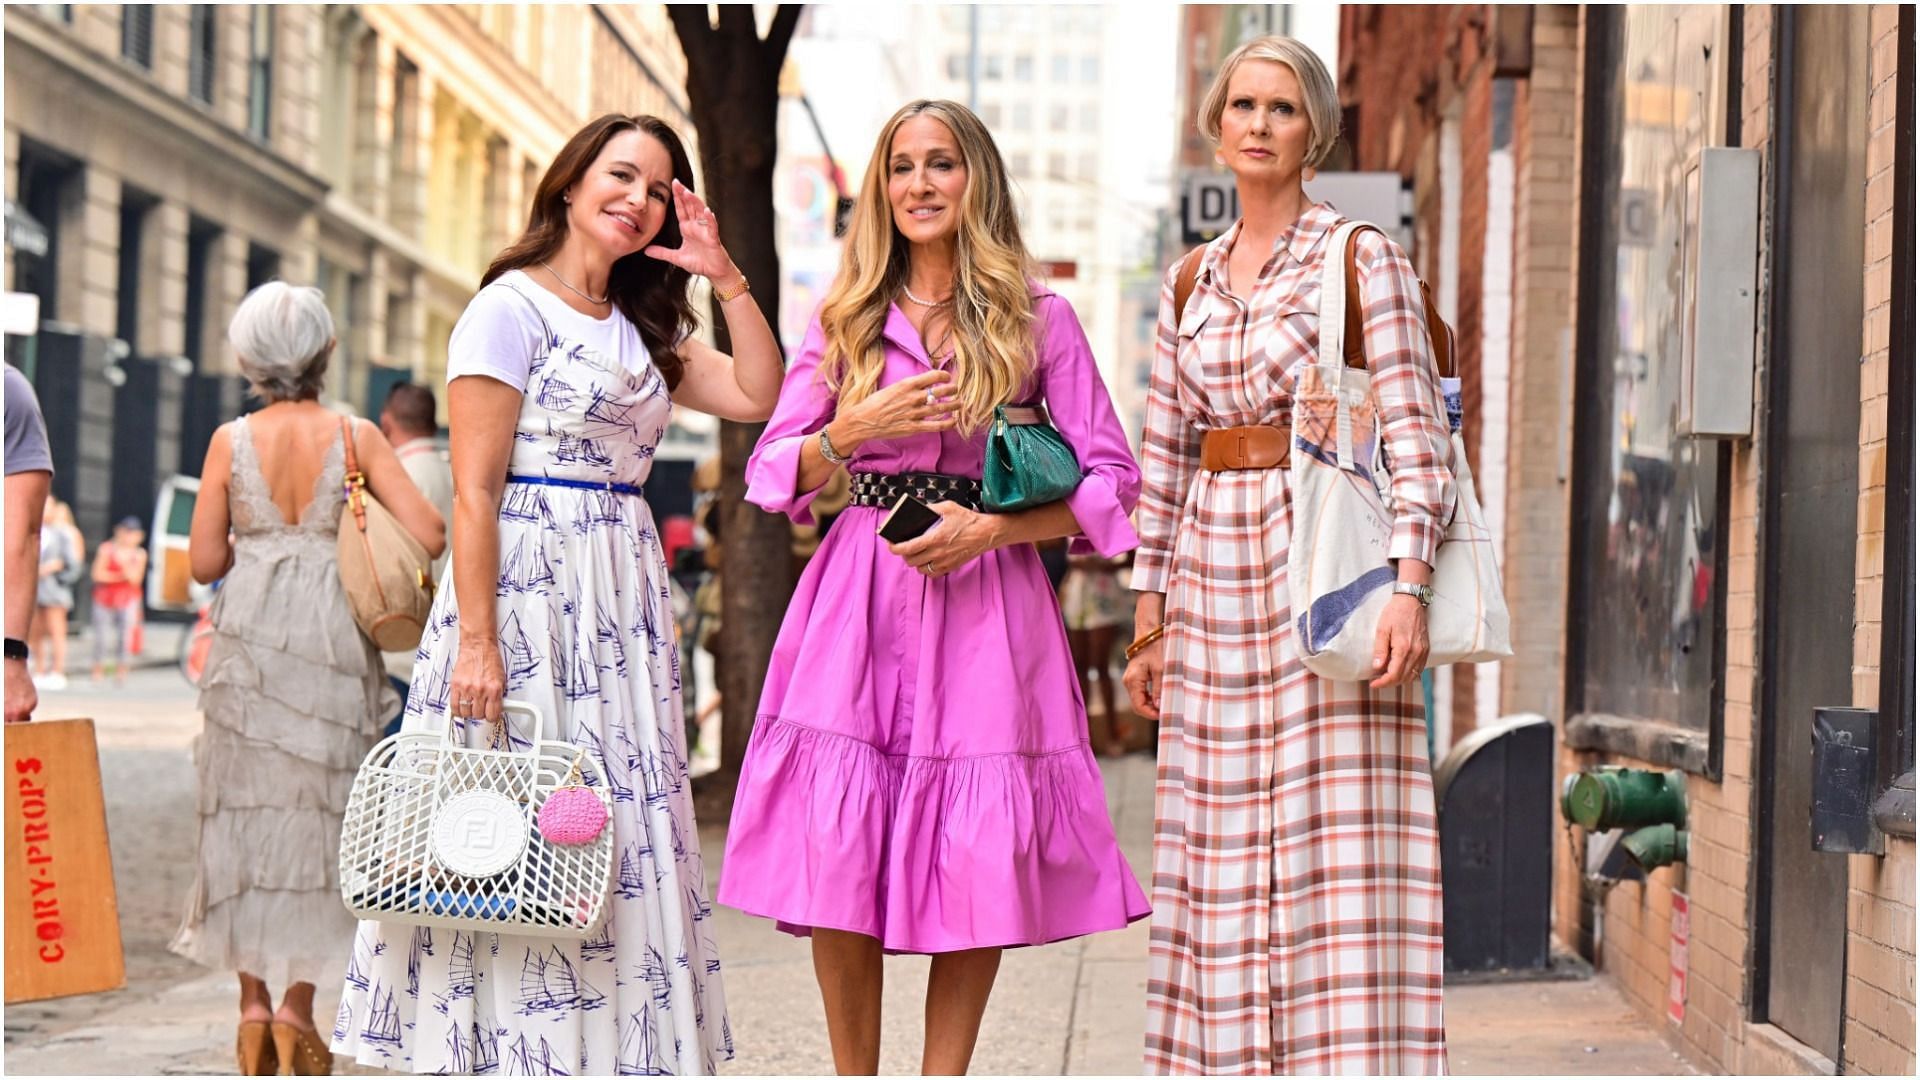 Kristin Davis, Sarah Jessica Parker, and Cynthia Nixon are seen on the set of &#039;And Just Like That...&#039; the follow-up series to &#039;Sex and the City&#039; in SoHo on July 20, 2021, in New York City (Image via Getty Images)